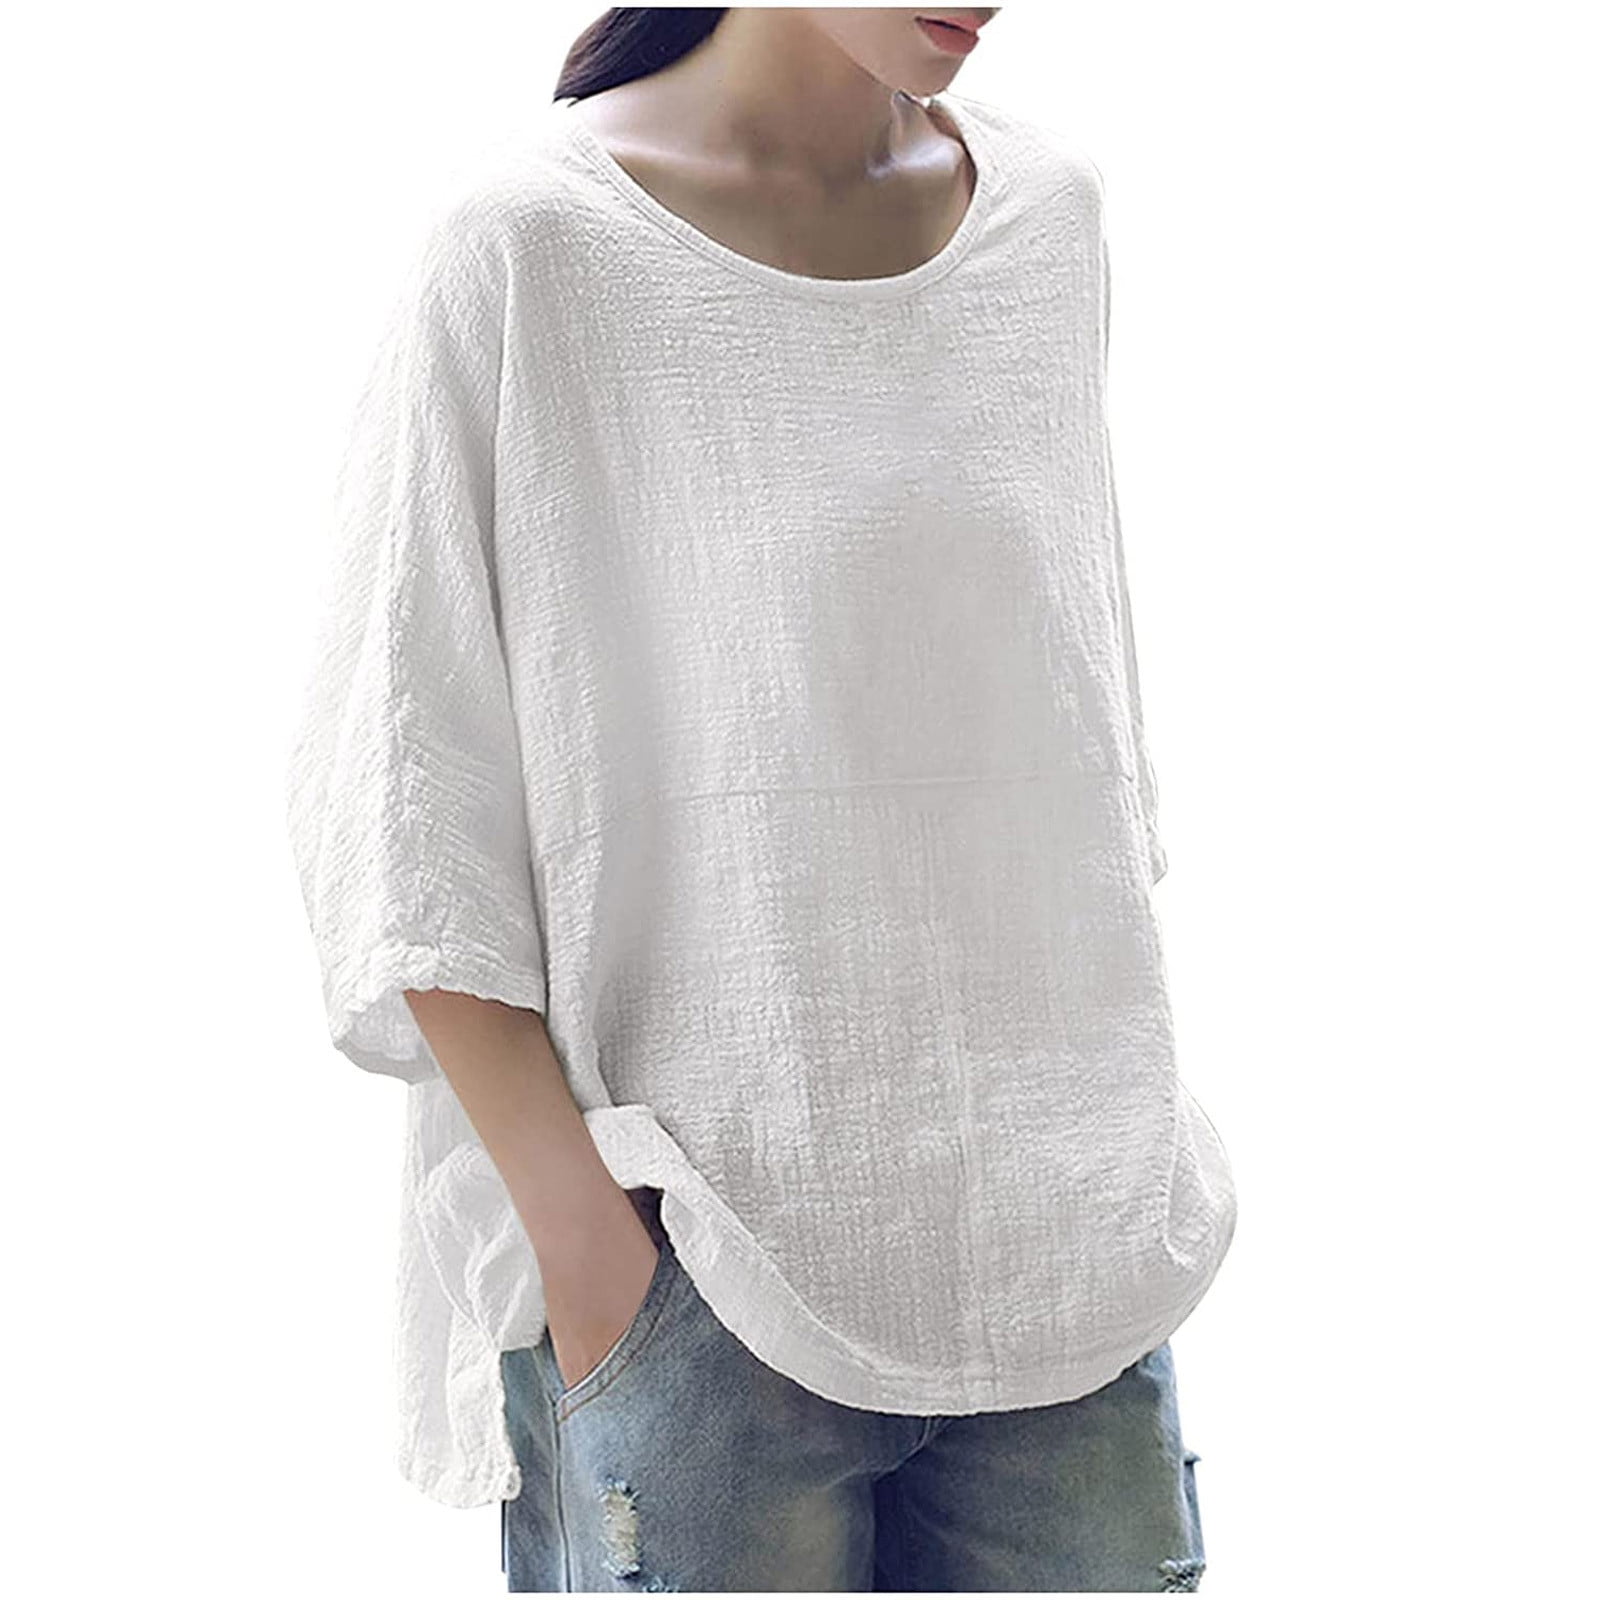 Aofany Womens Plus Size Tops Cotton Tops Casual Blouse T-shirt On ...